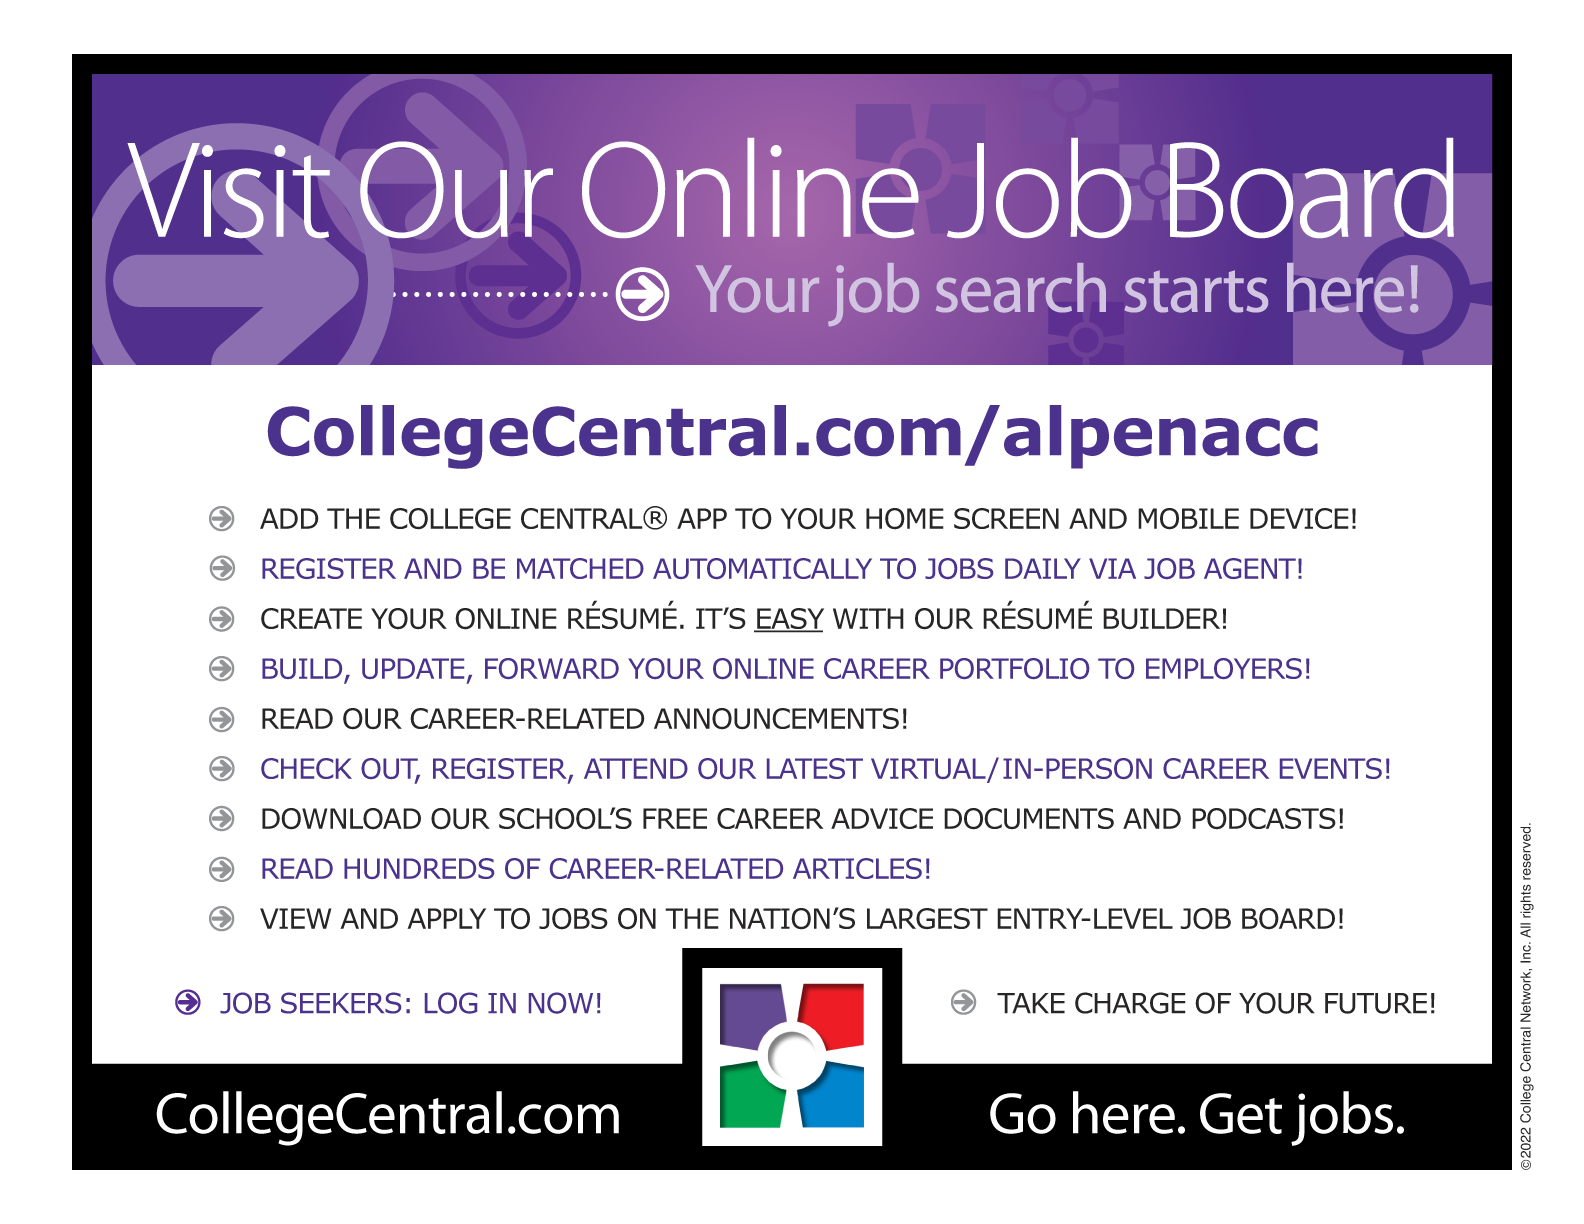 Visit our online job board at CollegeCentral.com/alpenacc. Add the College Central App to your home screen and mobile device. Register and be matched automatically to jobs daily via job agent. Creat your online resume-- It's easy with our resume builder! Build, update, forward your online career portfolio to employers. Read our career-related announcements. Check out, register, attend our latest virtual/in-person career events. Download our school's free career advice documents and podcasts. Read hundreds of career-related articles. View and apply to jobs on the nations largest entry-level job board.